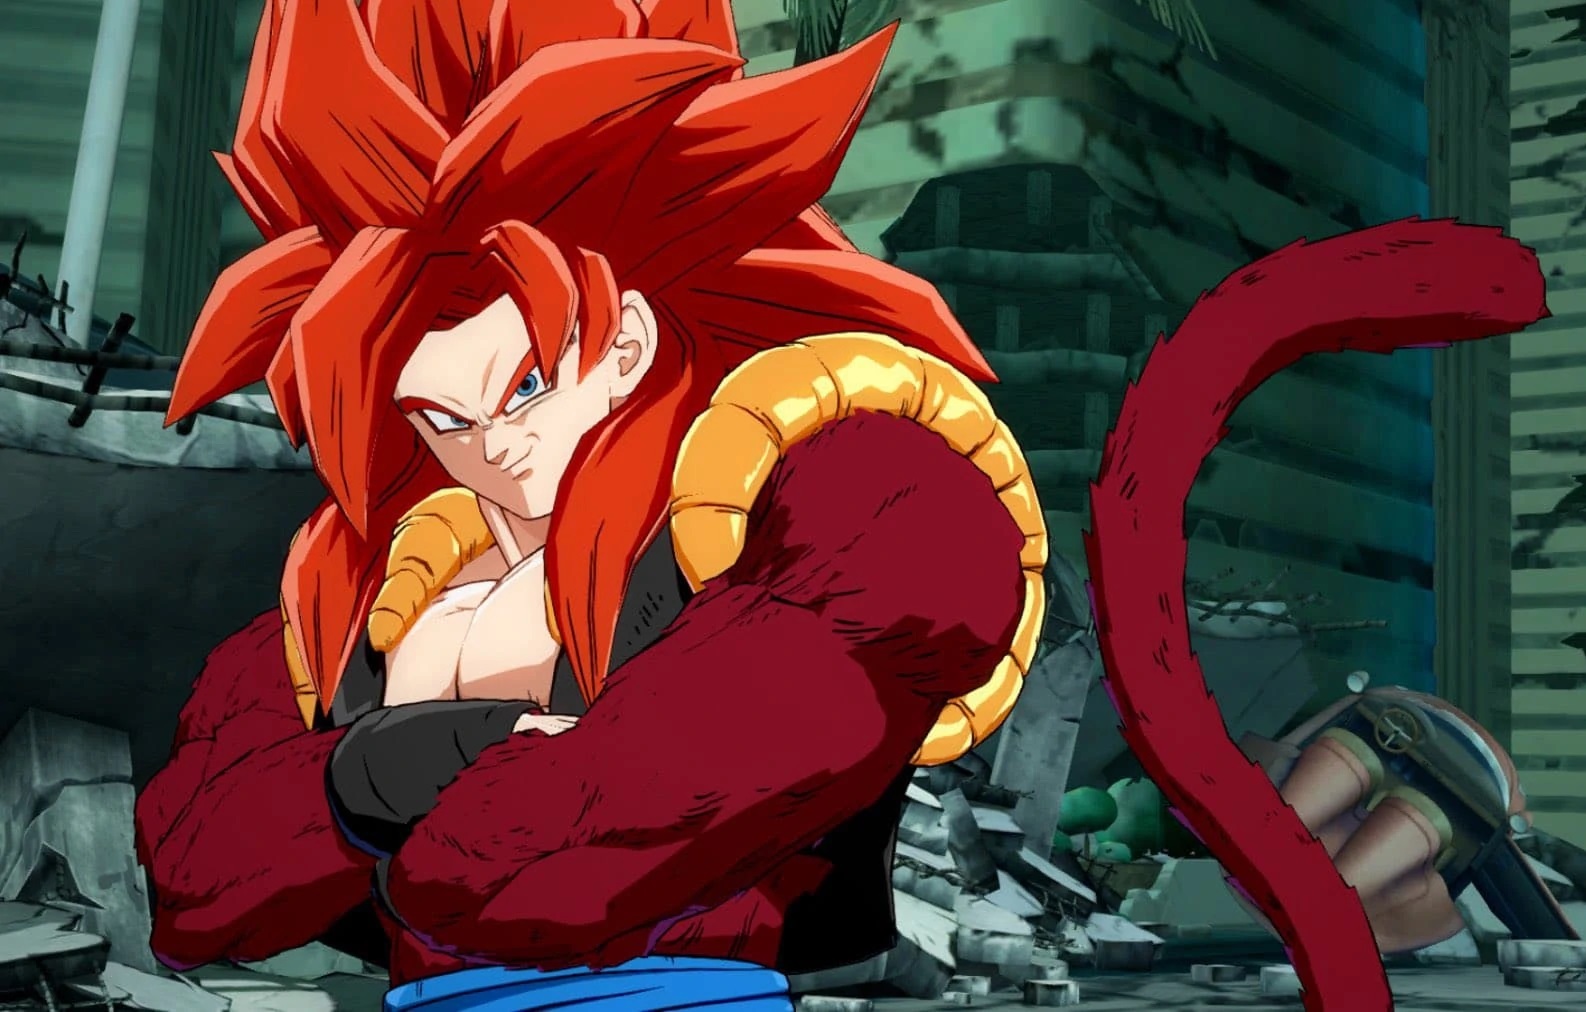 Turles will probably be the next DLC Character for more Goku :  r/dragonballfighterz